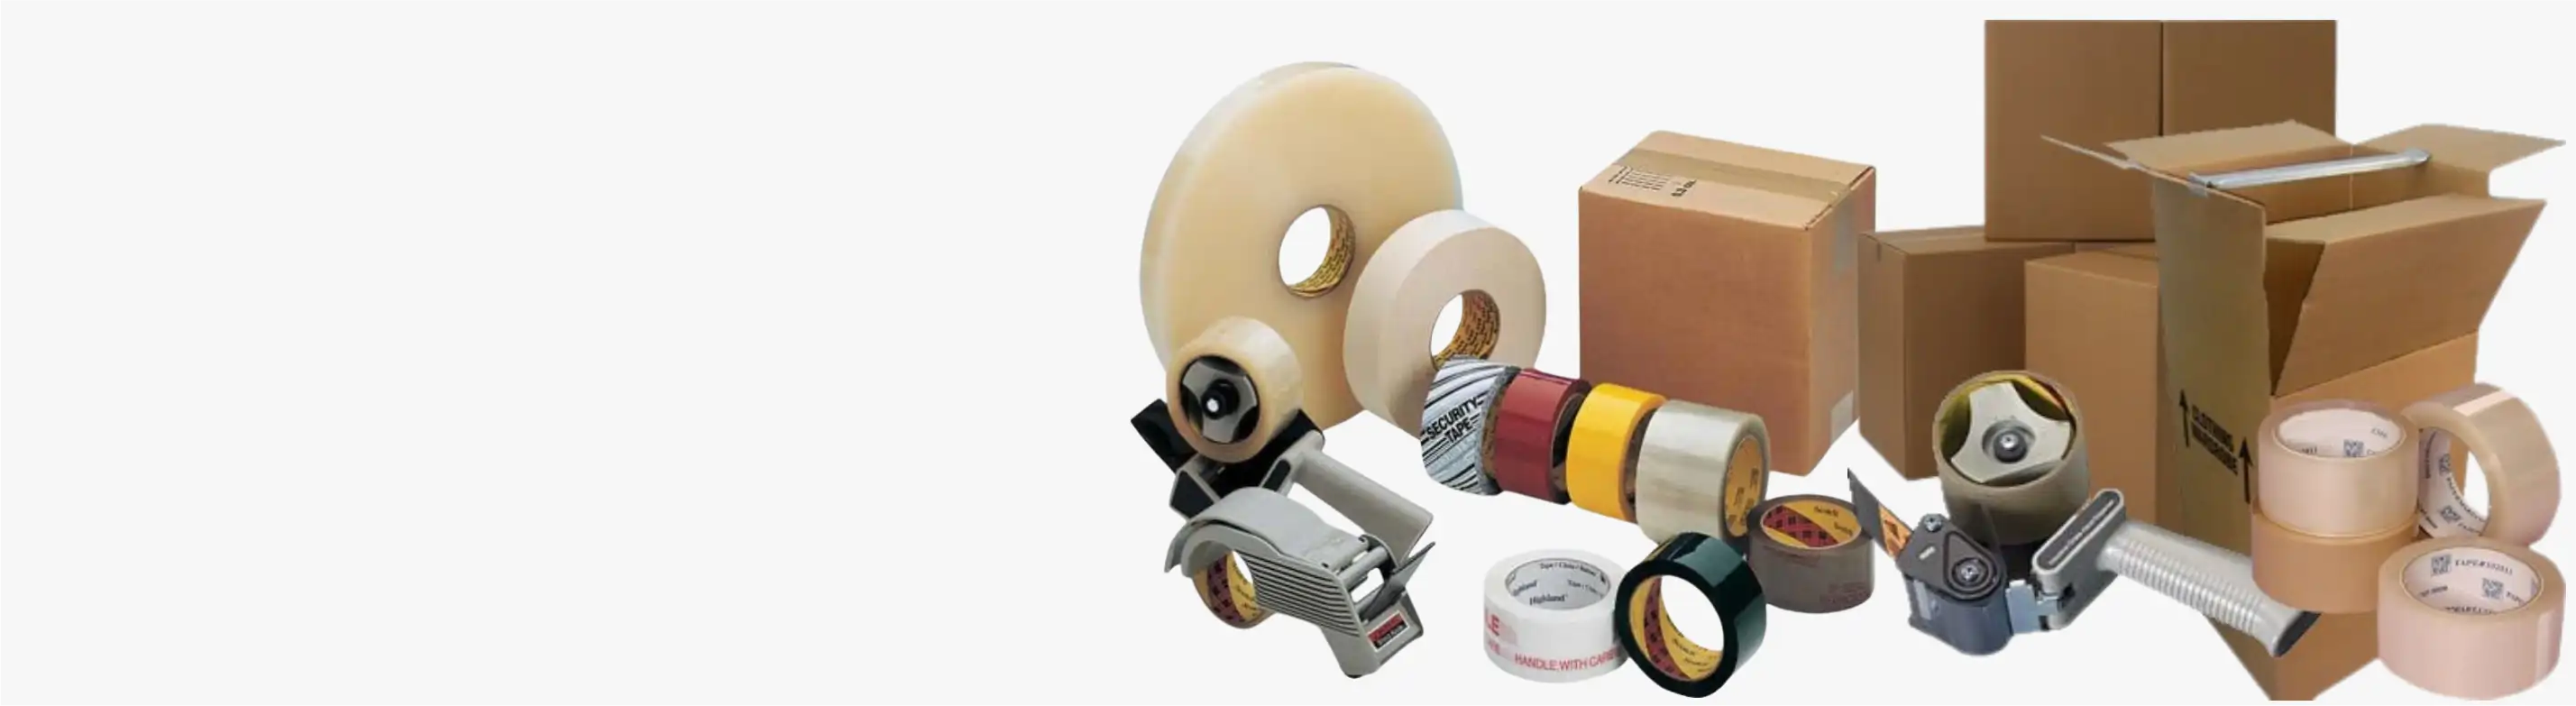 Tapes & Packaging Material